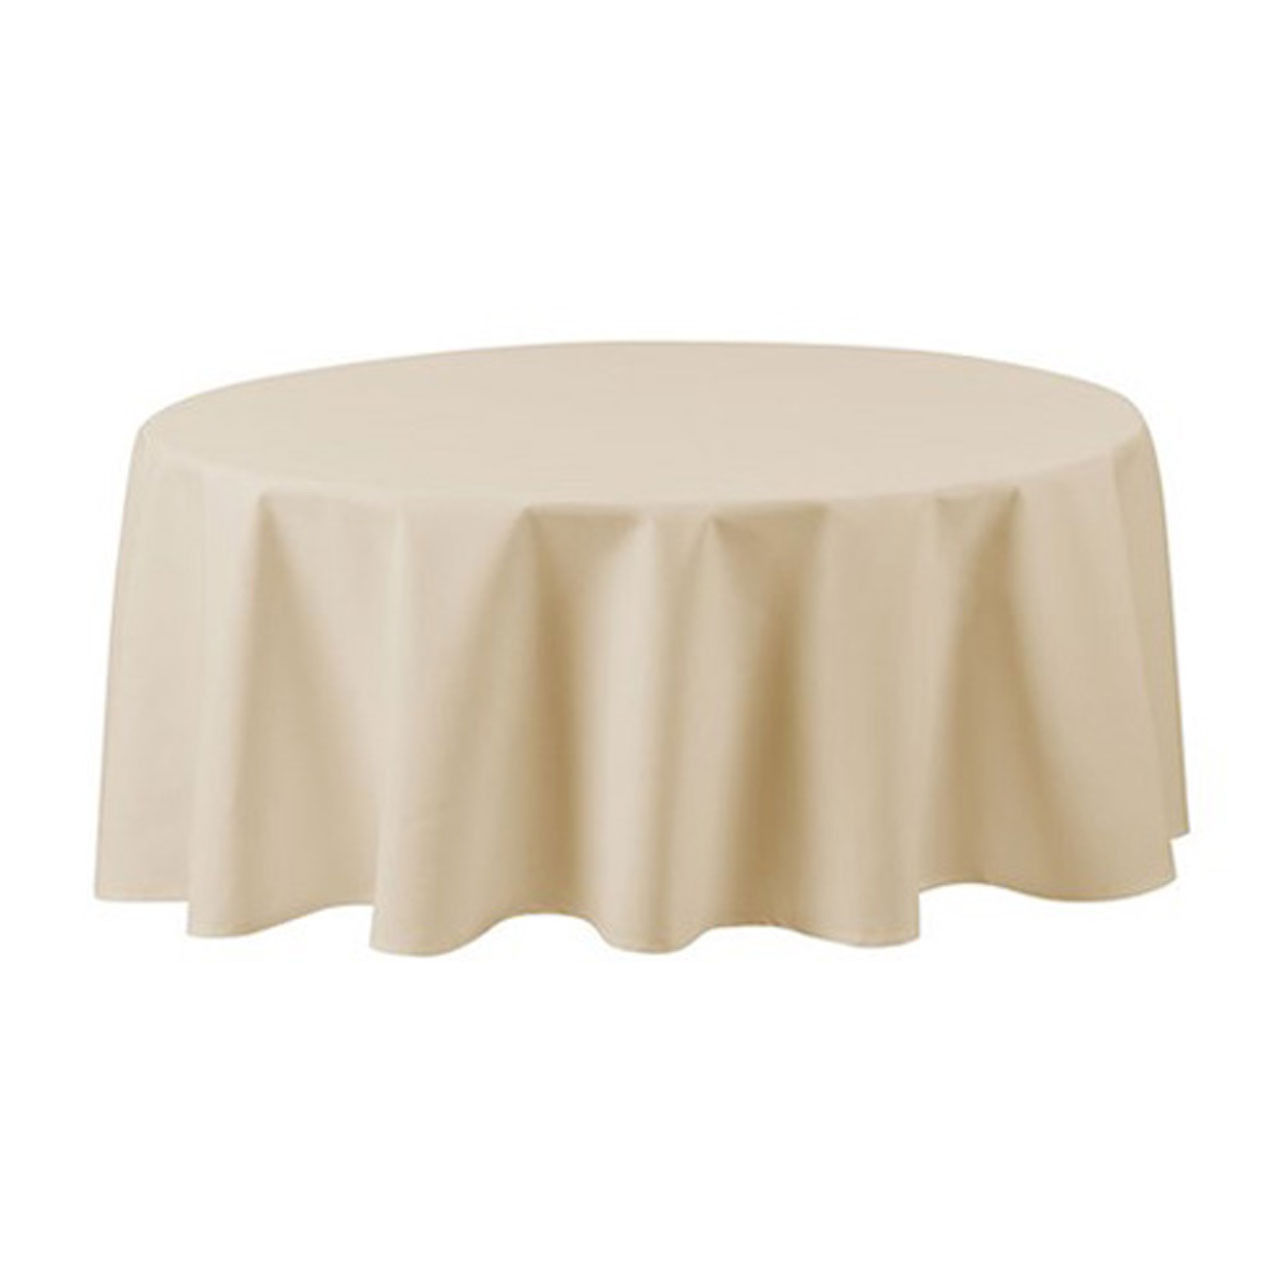 How many round tablecloths are included in each case?